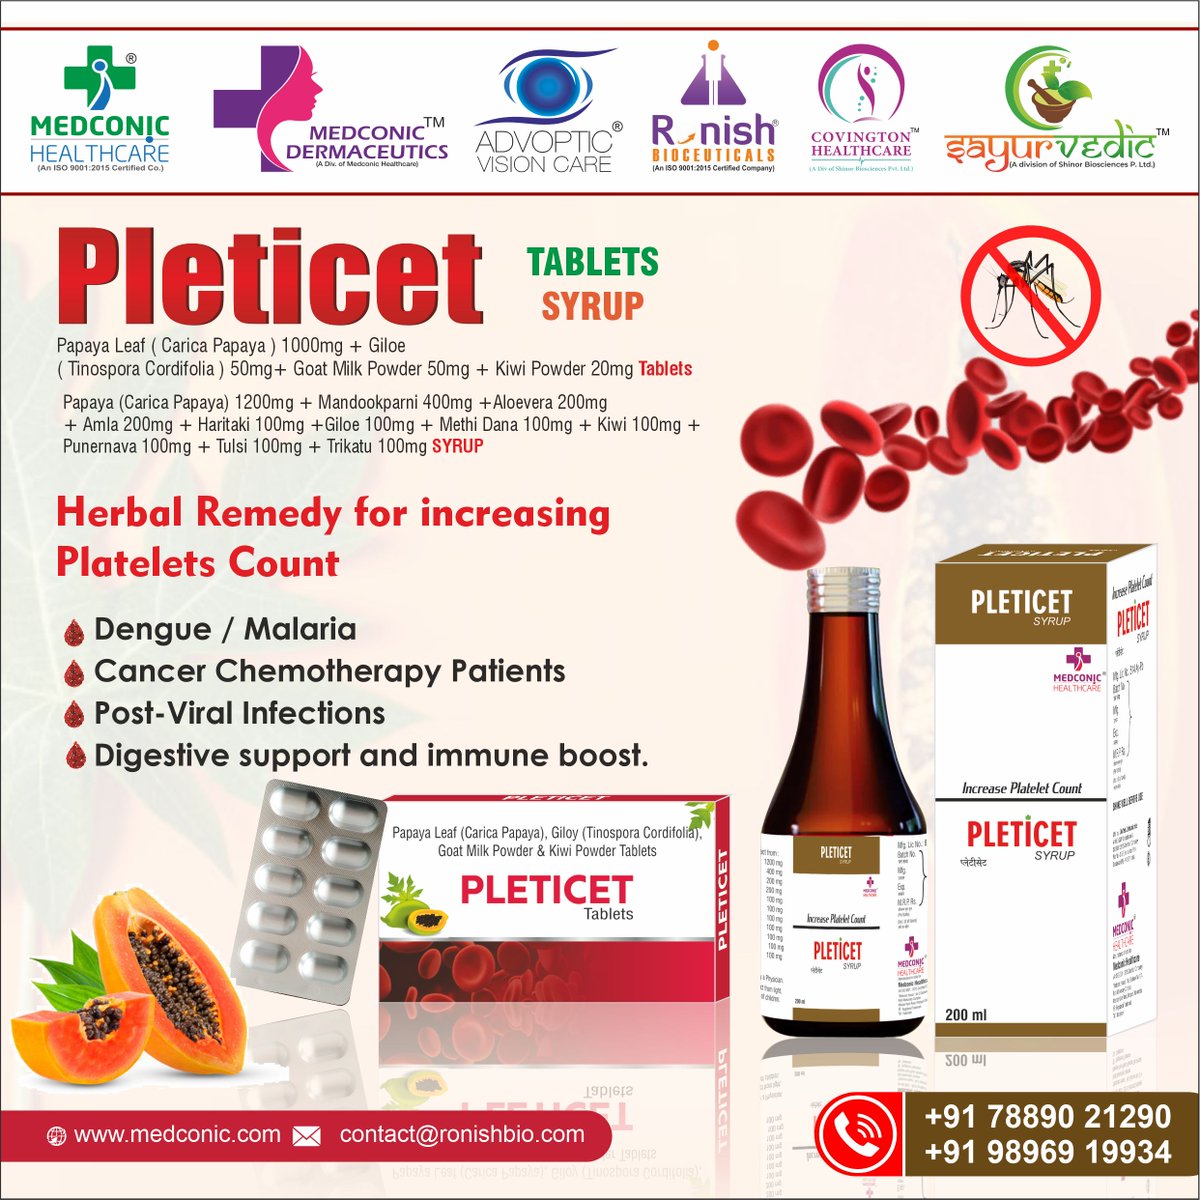 🌿 Discover the power of nature with PLETICET TAB! 

Our unique blend of Papaya Leaf, Giloe, Goat Milk Powder, and Kiwi Powder offers holistic wellness in every tablet.

#PleticetTab #MedconicHealthcare #PCDPharma #NaturalHealth #WellnessJourney #HealthyLiving #HerbalSupplements